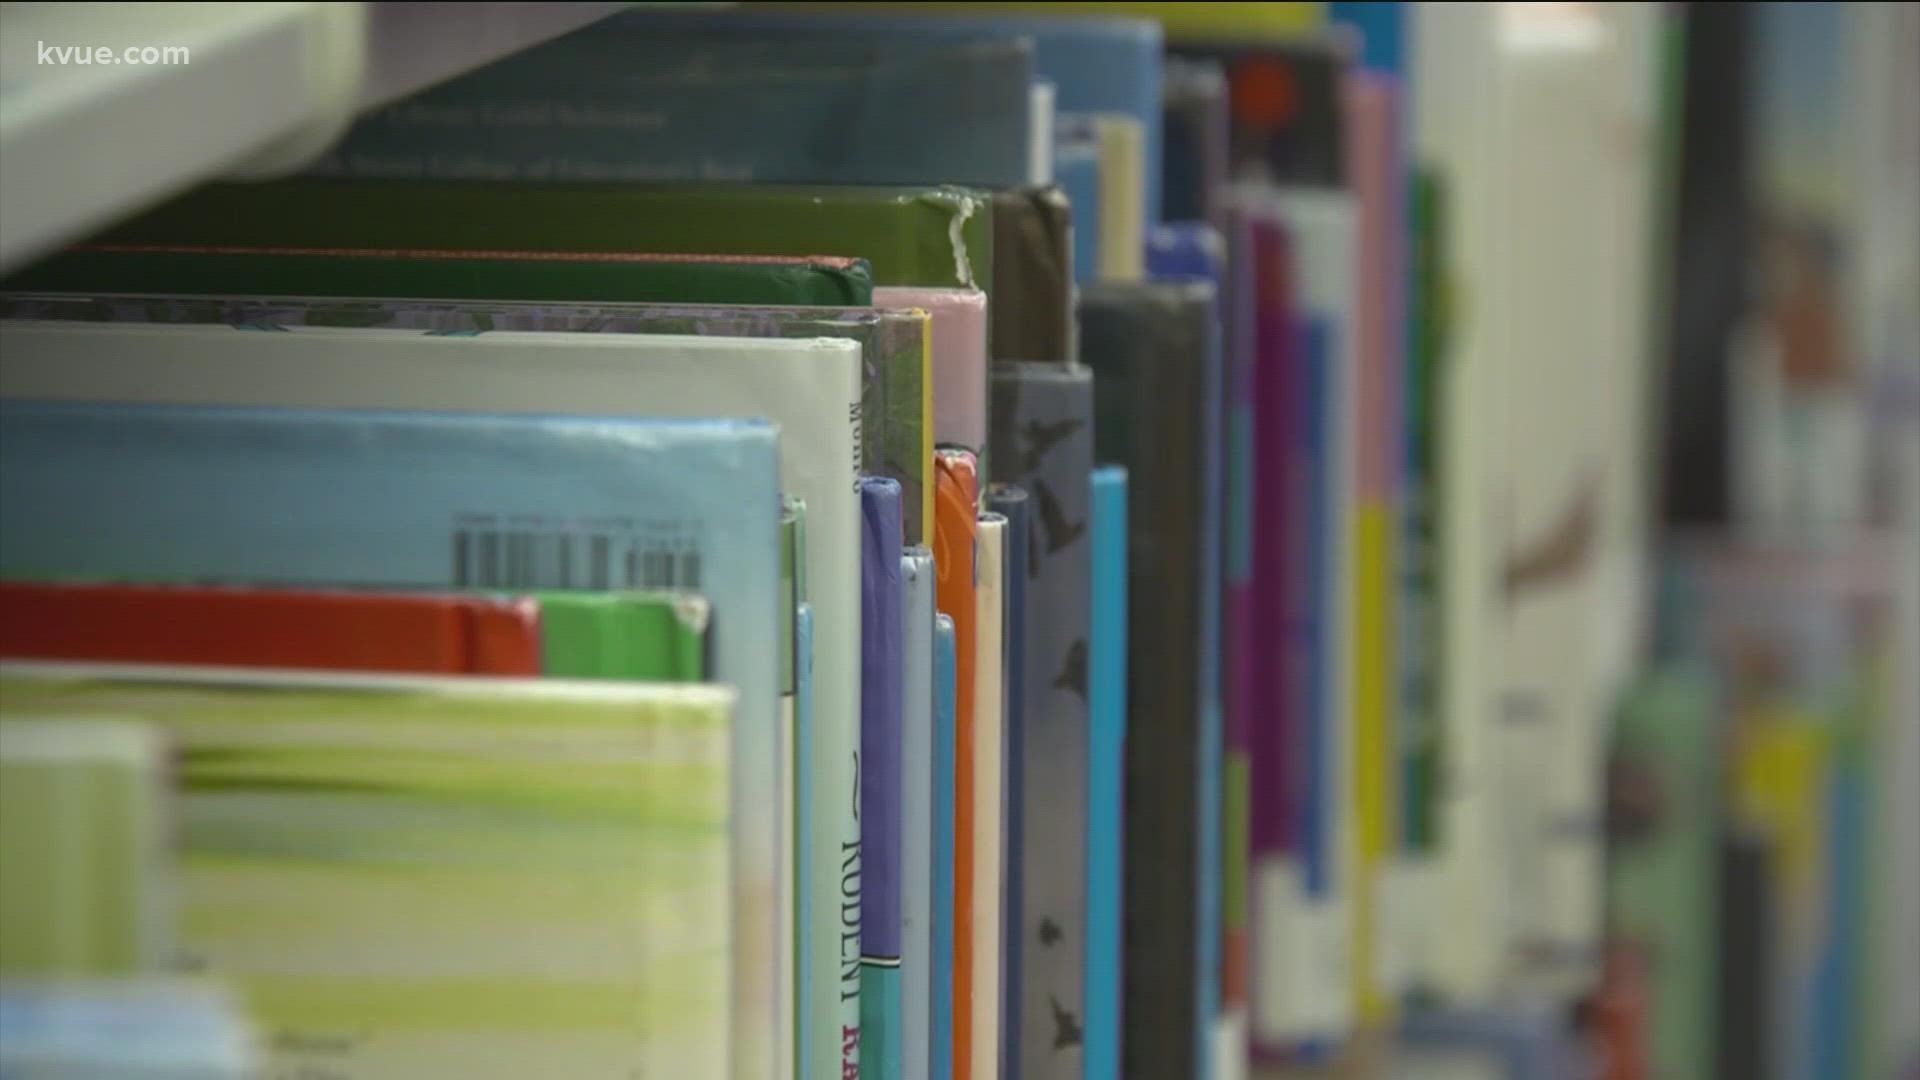 Some parents raised concern about both the books in schools and how the county has handled the funding.